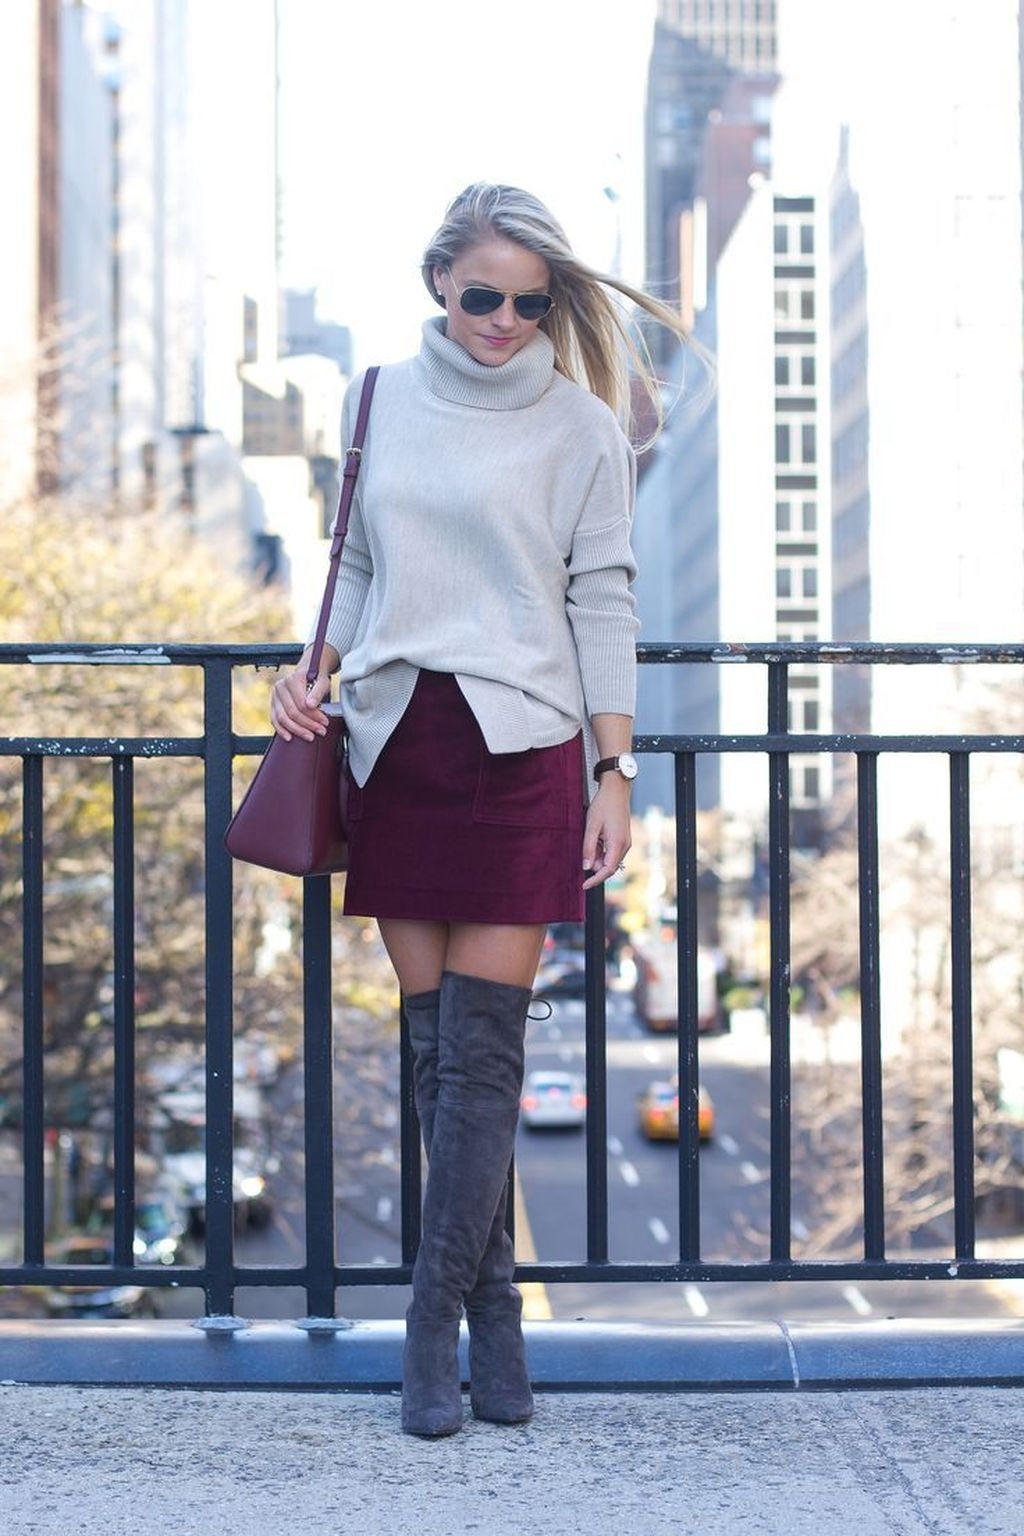 39 Adorable Winter Outfits Ideas Boots Skirts 